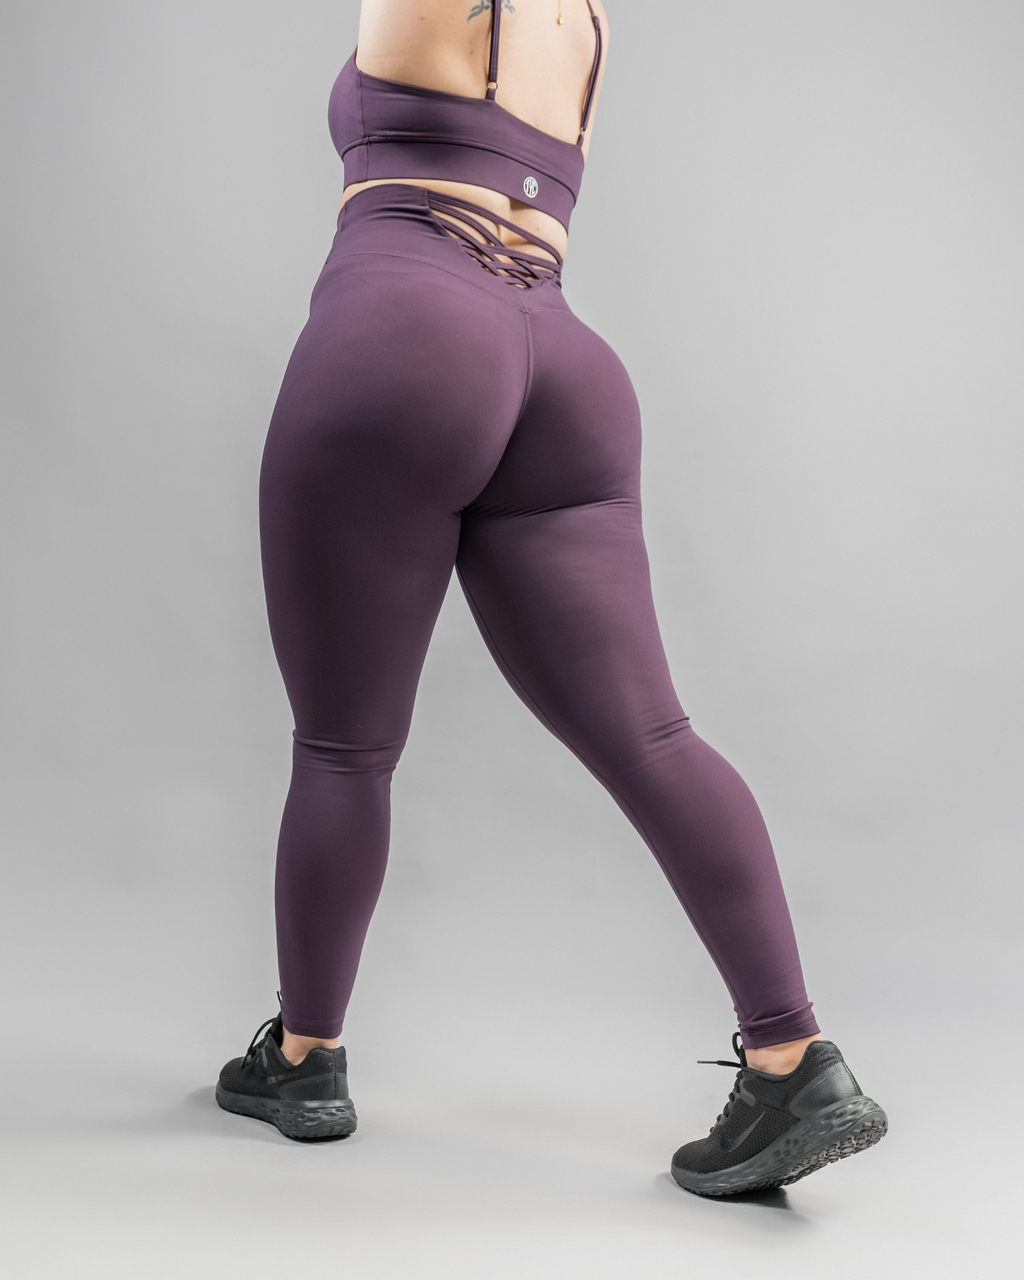 I'm a thick girl and forked out for some new gym leggings - when they  arrived I was left stunned by the size of them